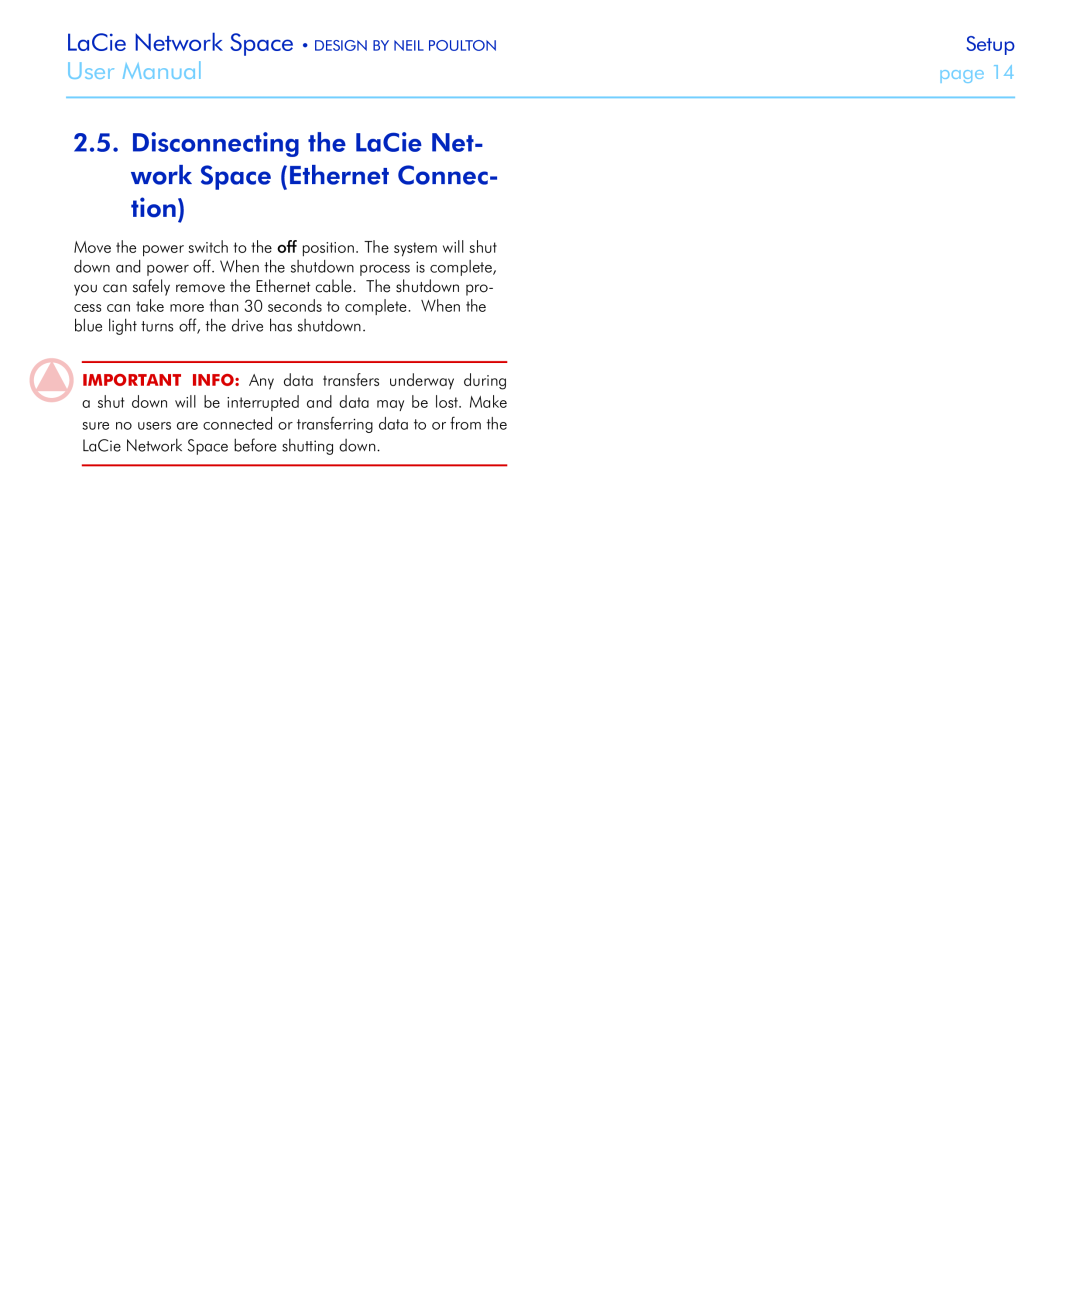 LaCie Network Space user manual Disconnecting the LaCie Net- work Space Ethernet Connec- tion, User Manual, Setup, page 